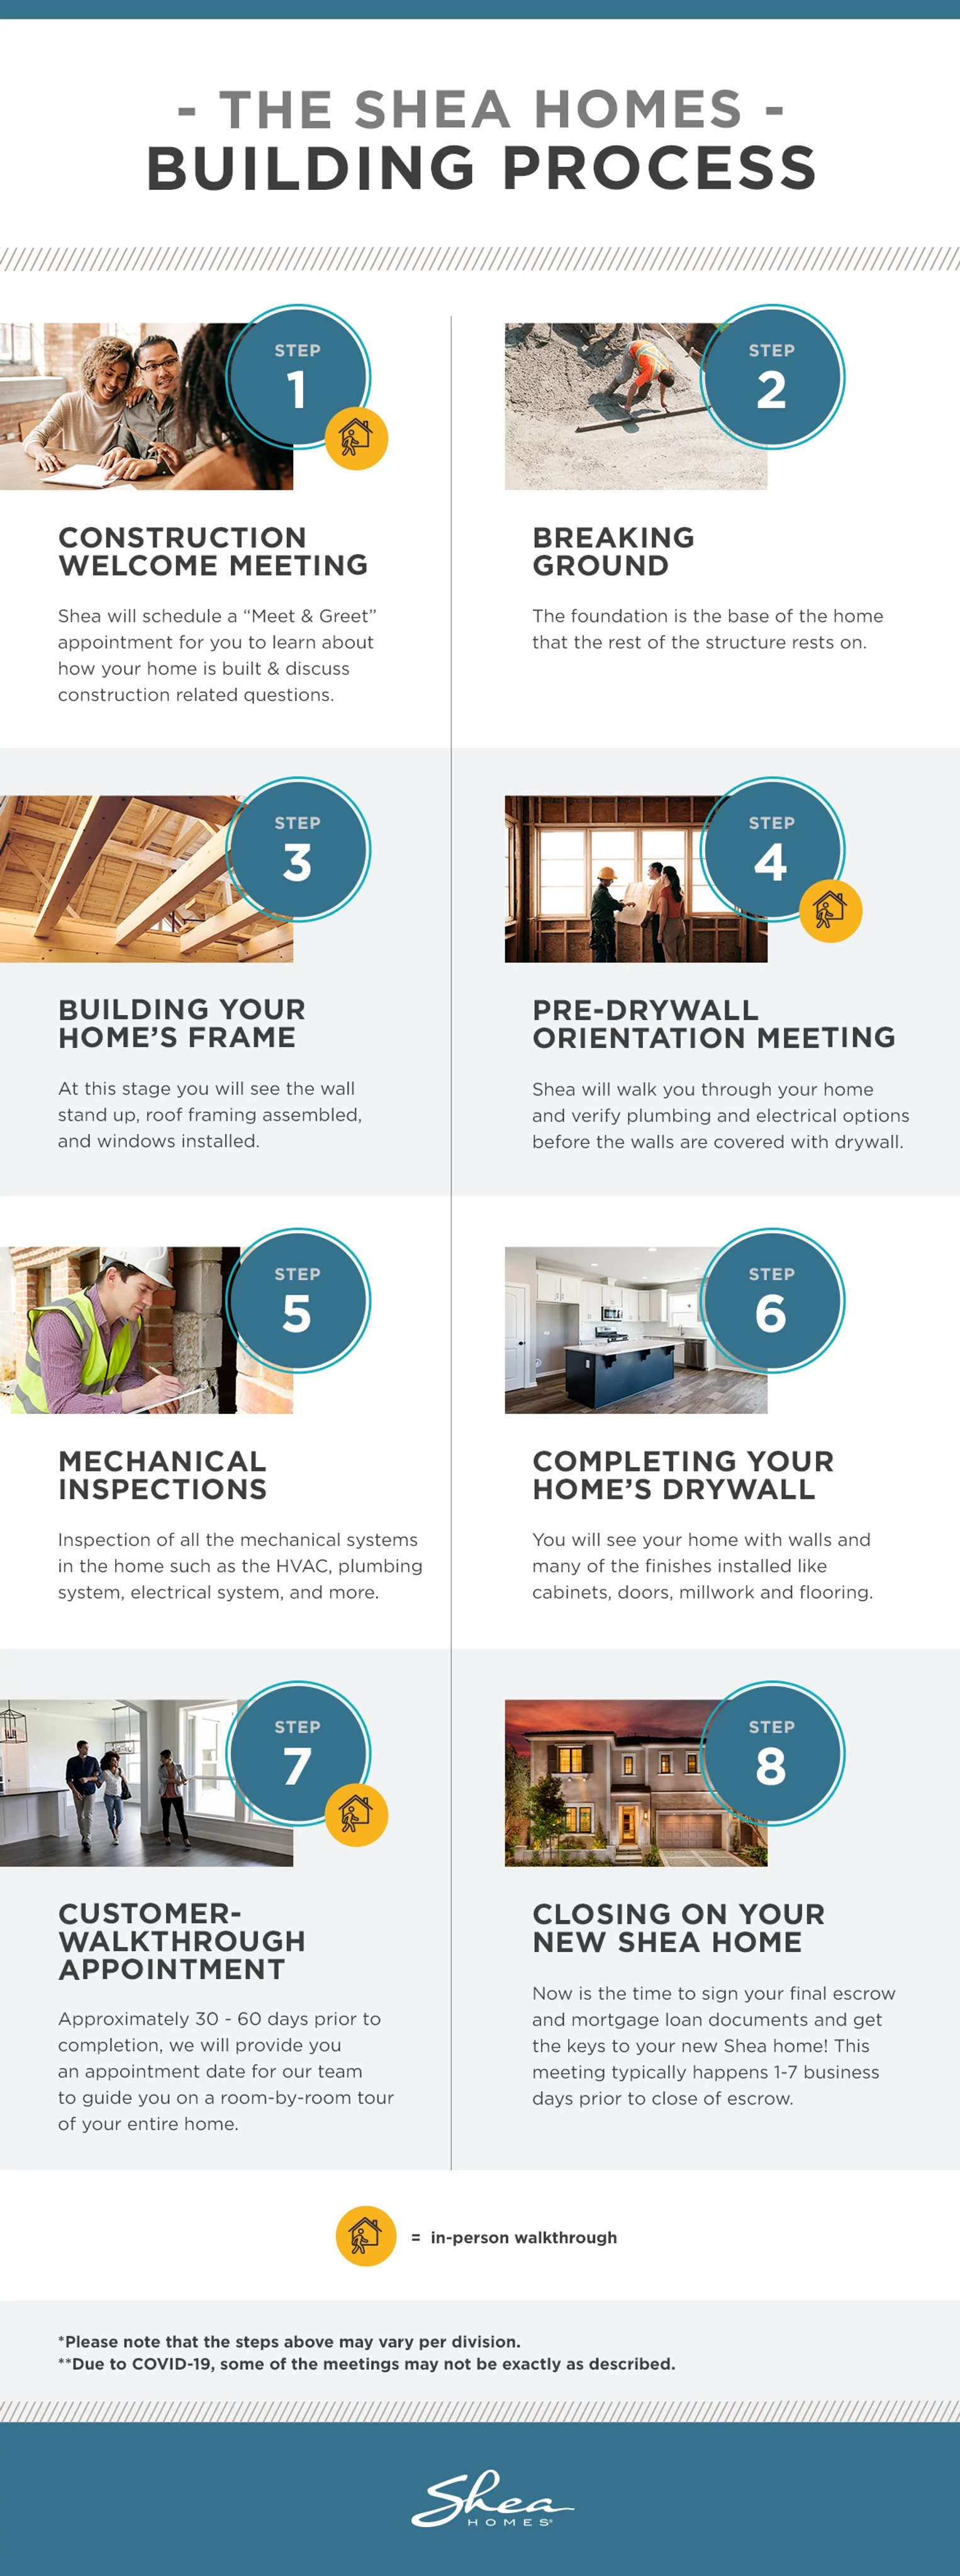 SHEA2037-NewHomeBuildingProcess-Infographic-R1.png